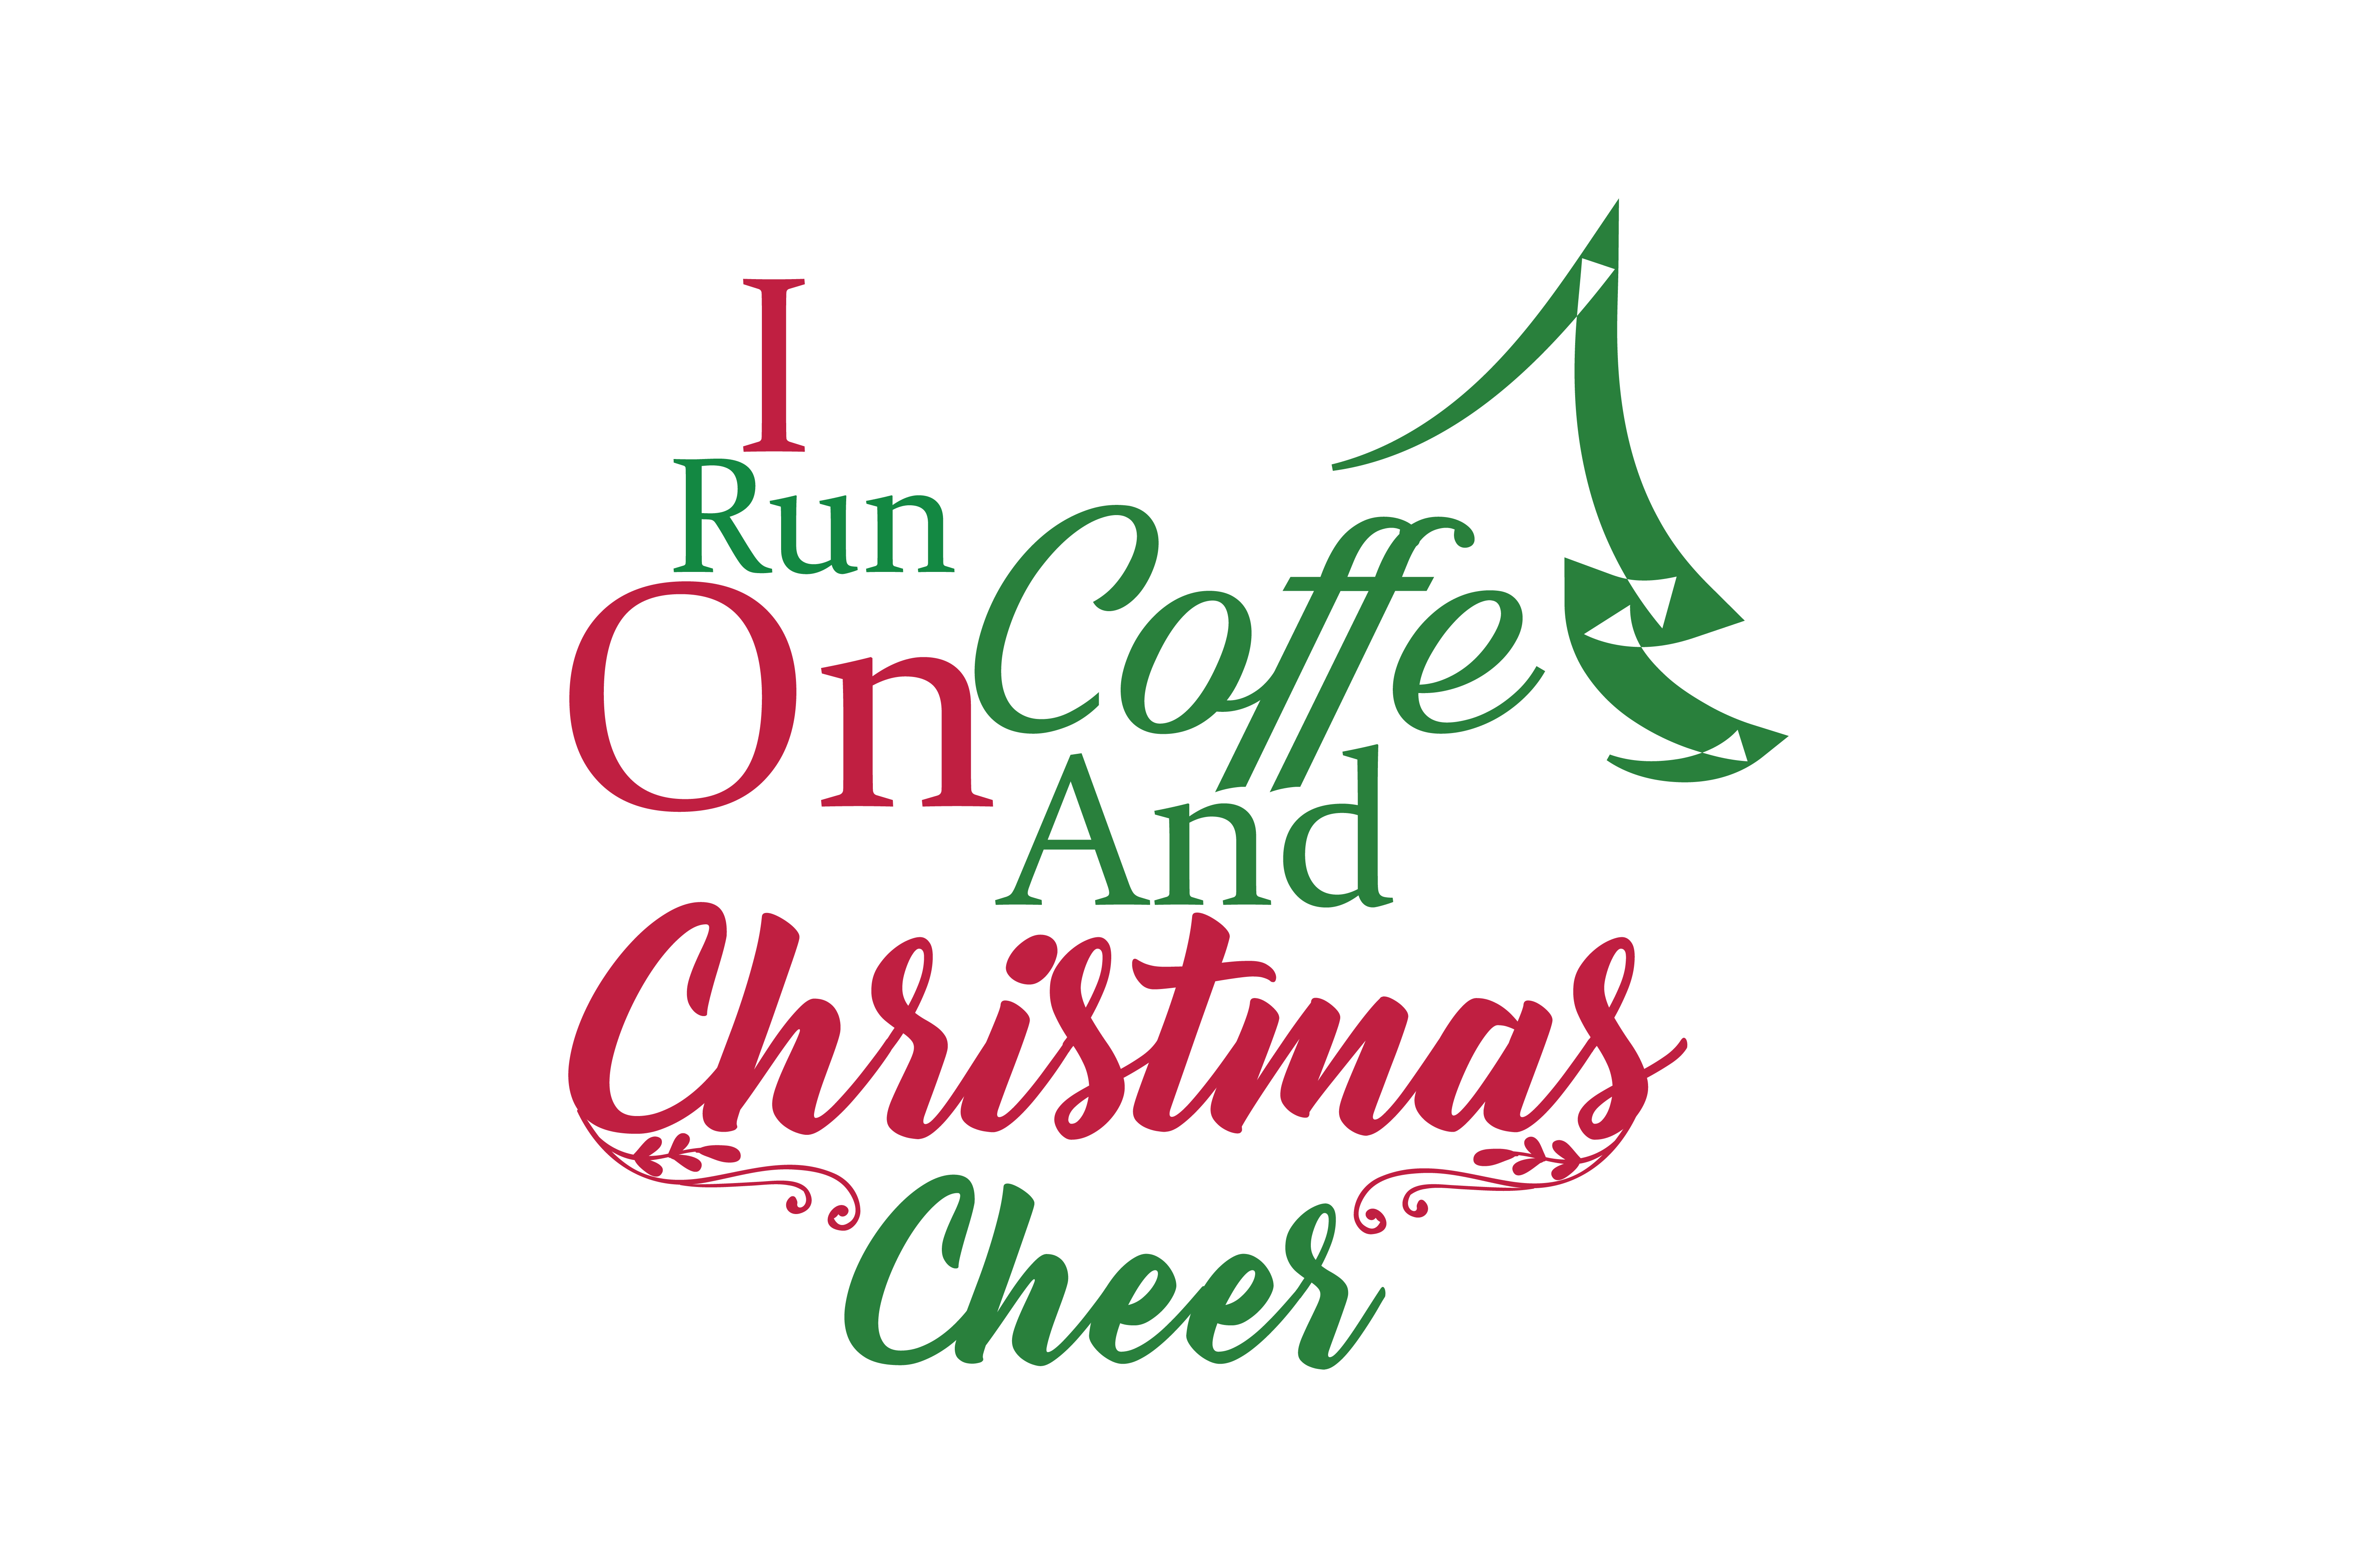 I Run On Coffee And Christmas Cheer Svg Cut Graphic By Thelucky Creative Fabrica